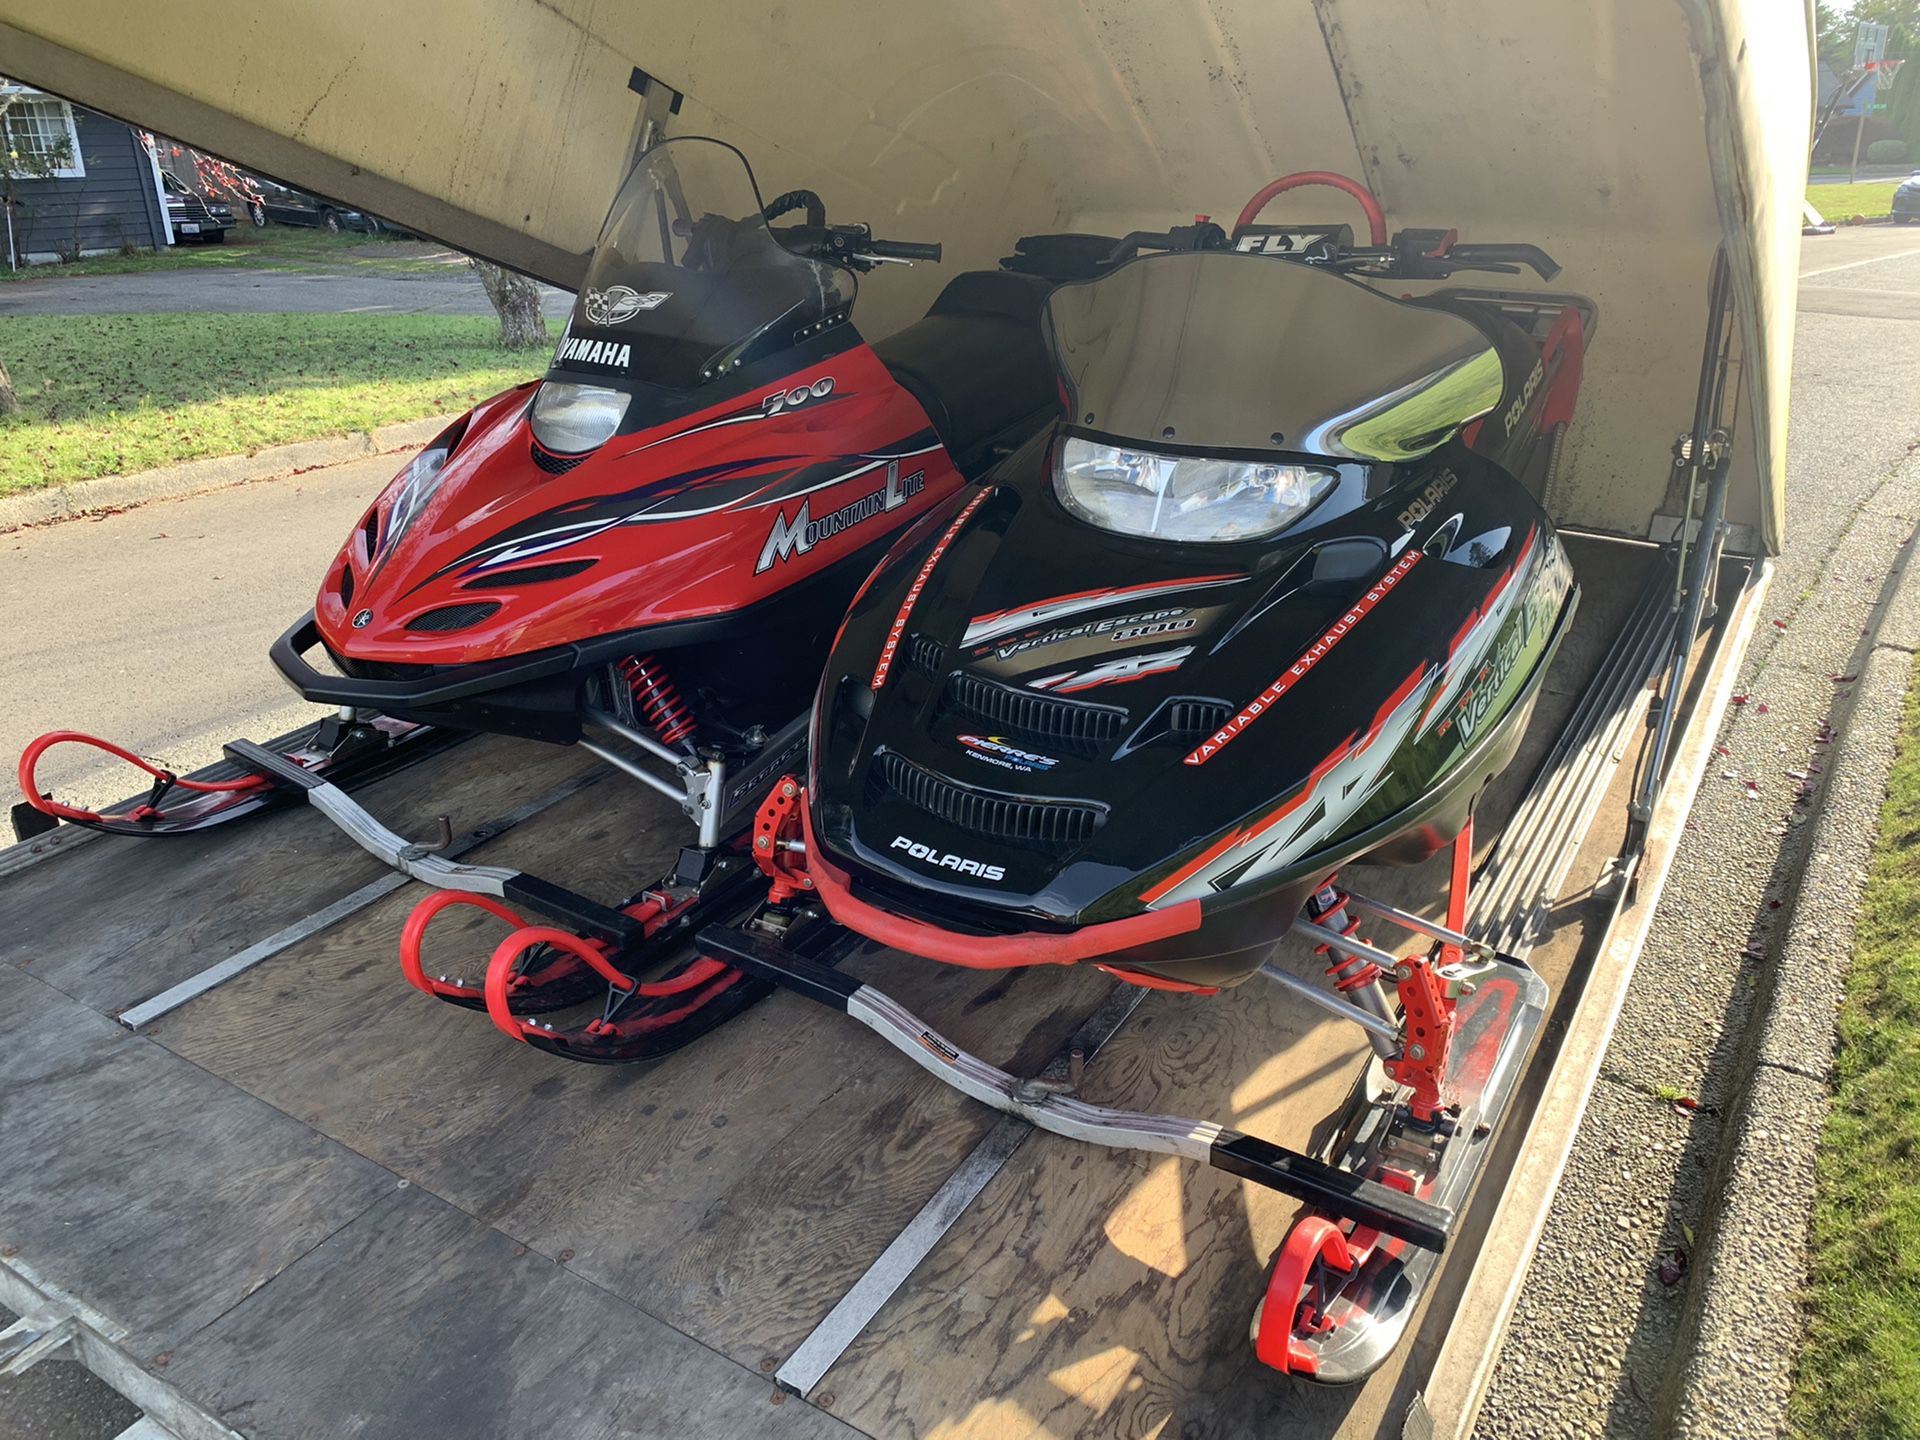 Snowmobile and Trailer. 2003 Polaris RMK Vertical Escape 800, 2001 Yamaha Mountain Light 500. 2000 covered drive on/off trailer